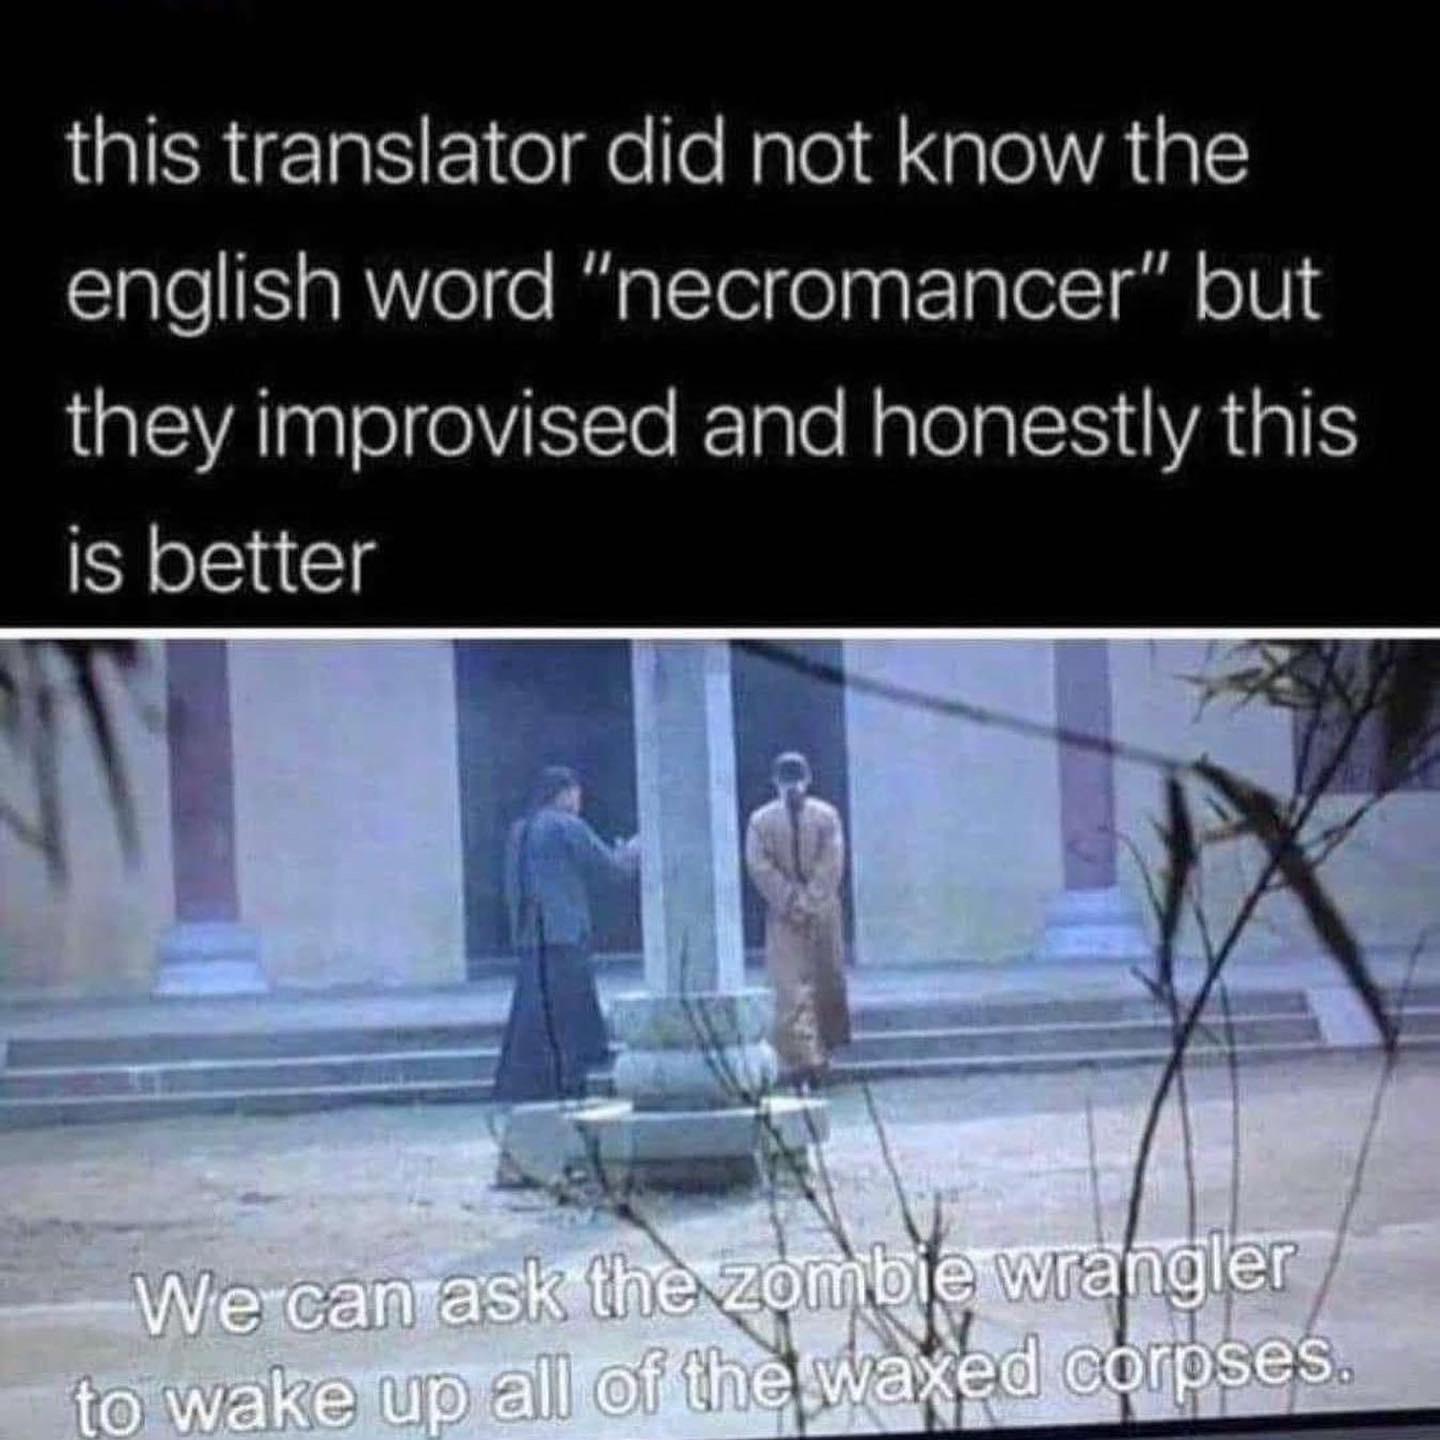 daily dose of pics and memes - libertarian t shirts - this translator did not know the english word "necromancer" but they improvised and honestly this is better We can ask the zombie wrangler to wake up all of the waxed corpses.